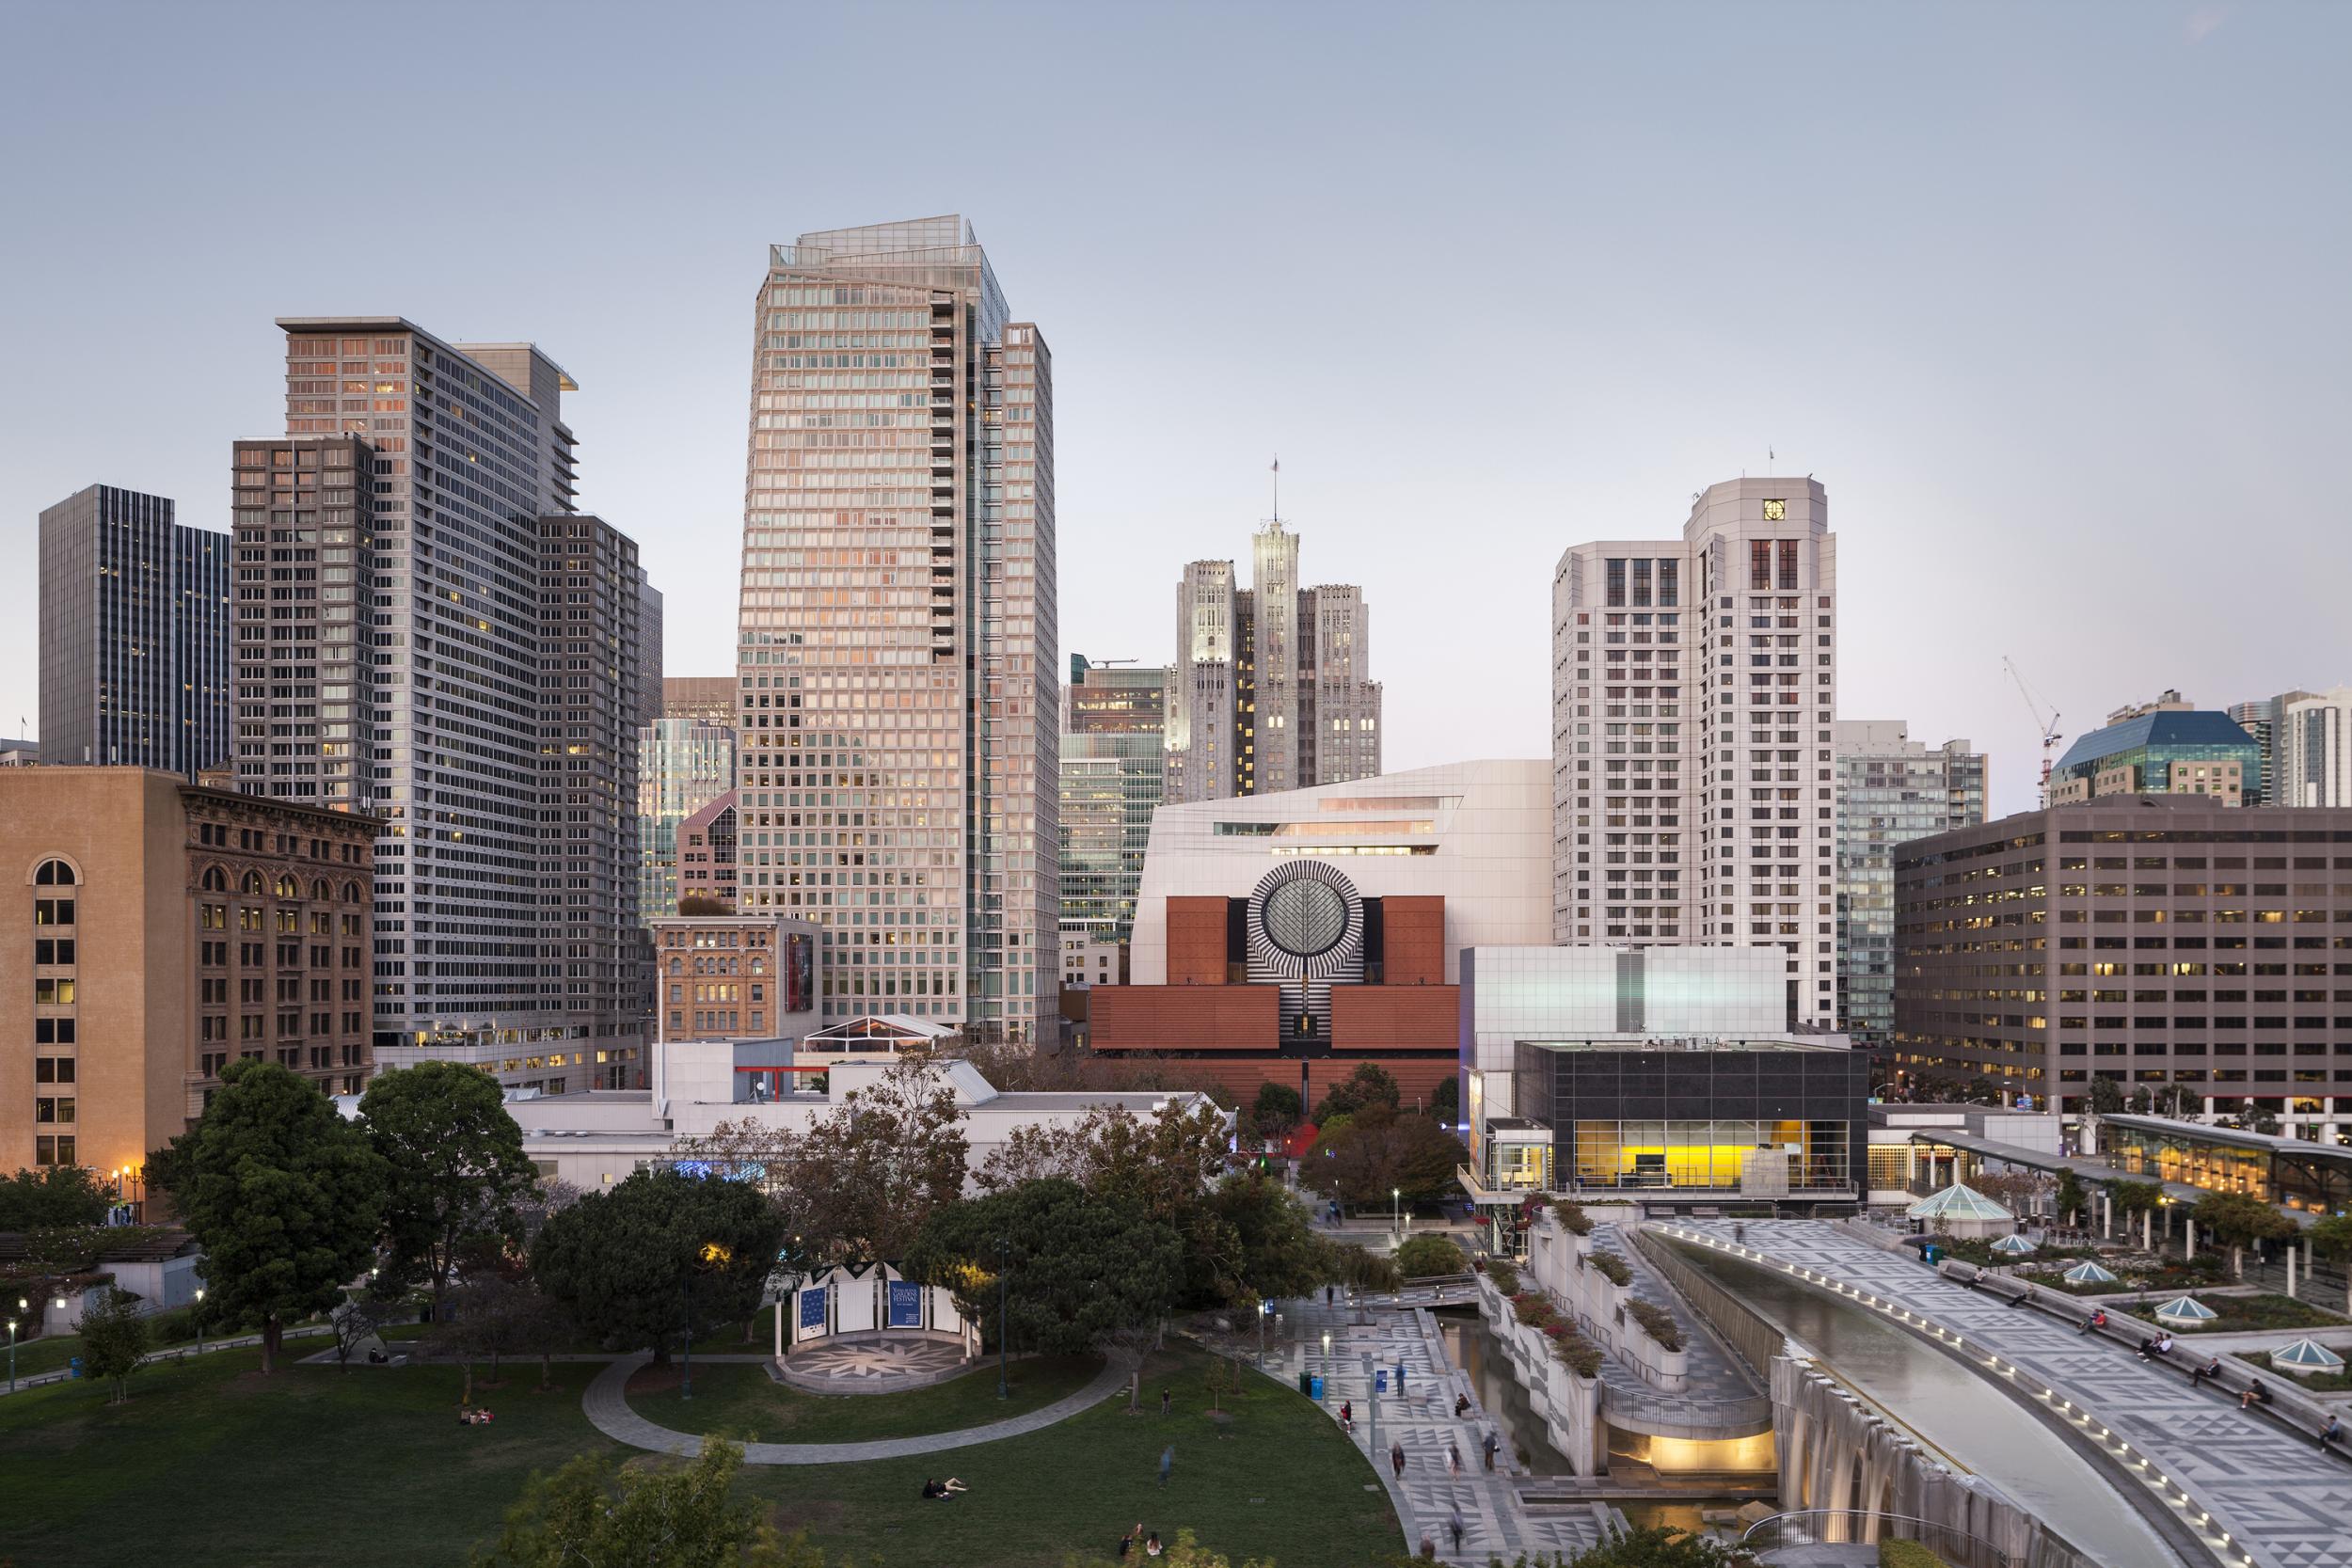 San Francisco Museum of Modern Art is pricey, but worth it